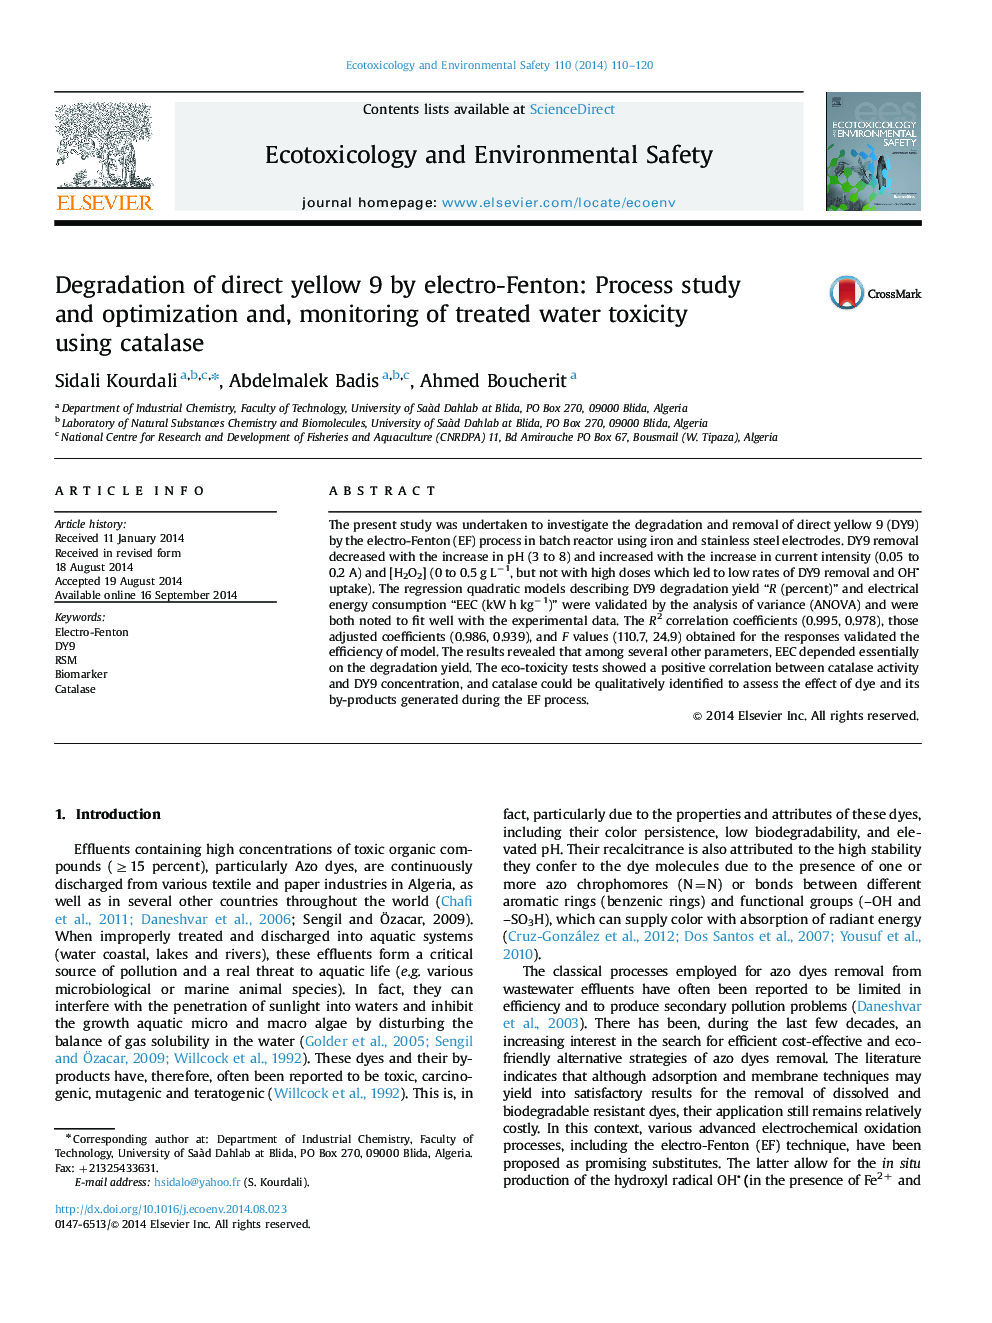 Degradation of direct yellow 9 by electro-Fenton: Process study and optimization and, monitoring of treated water toxicity using catalase